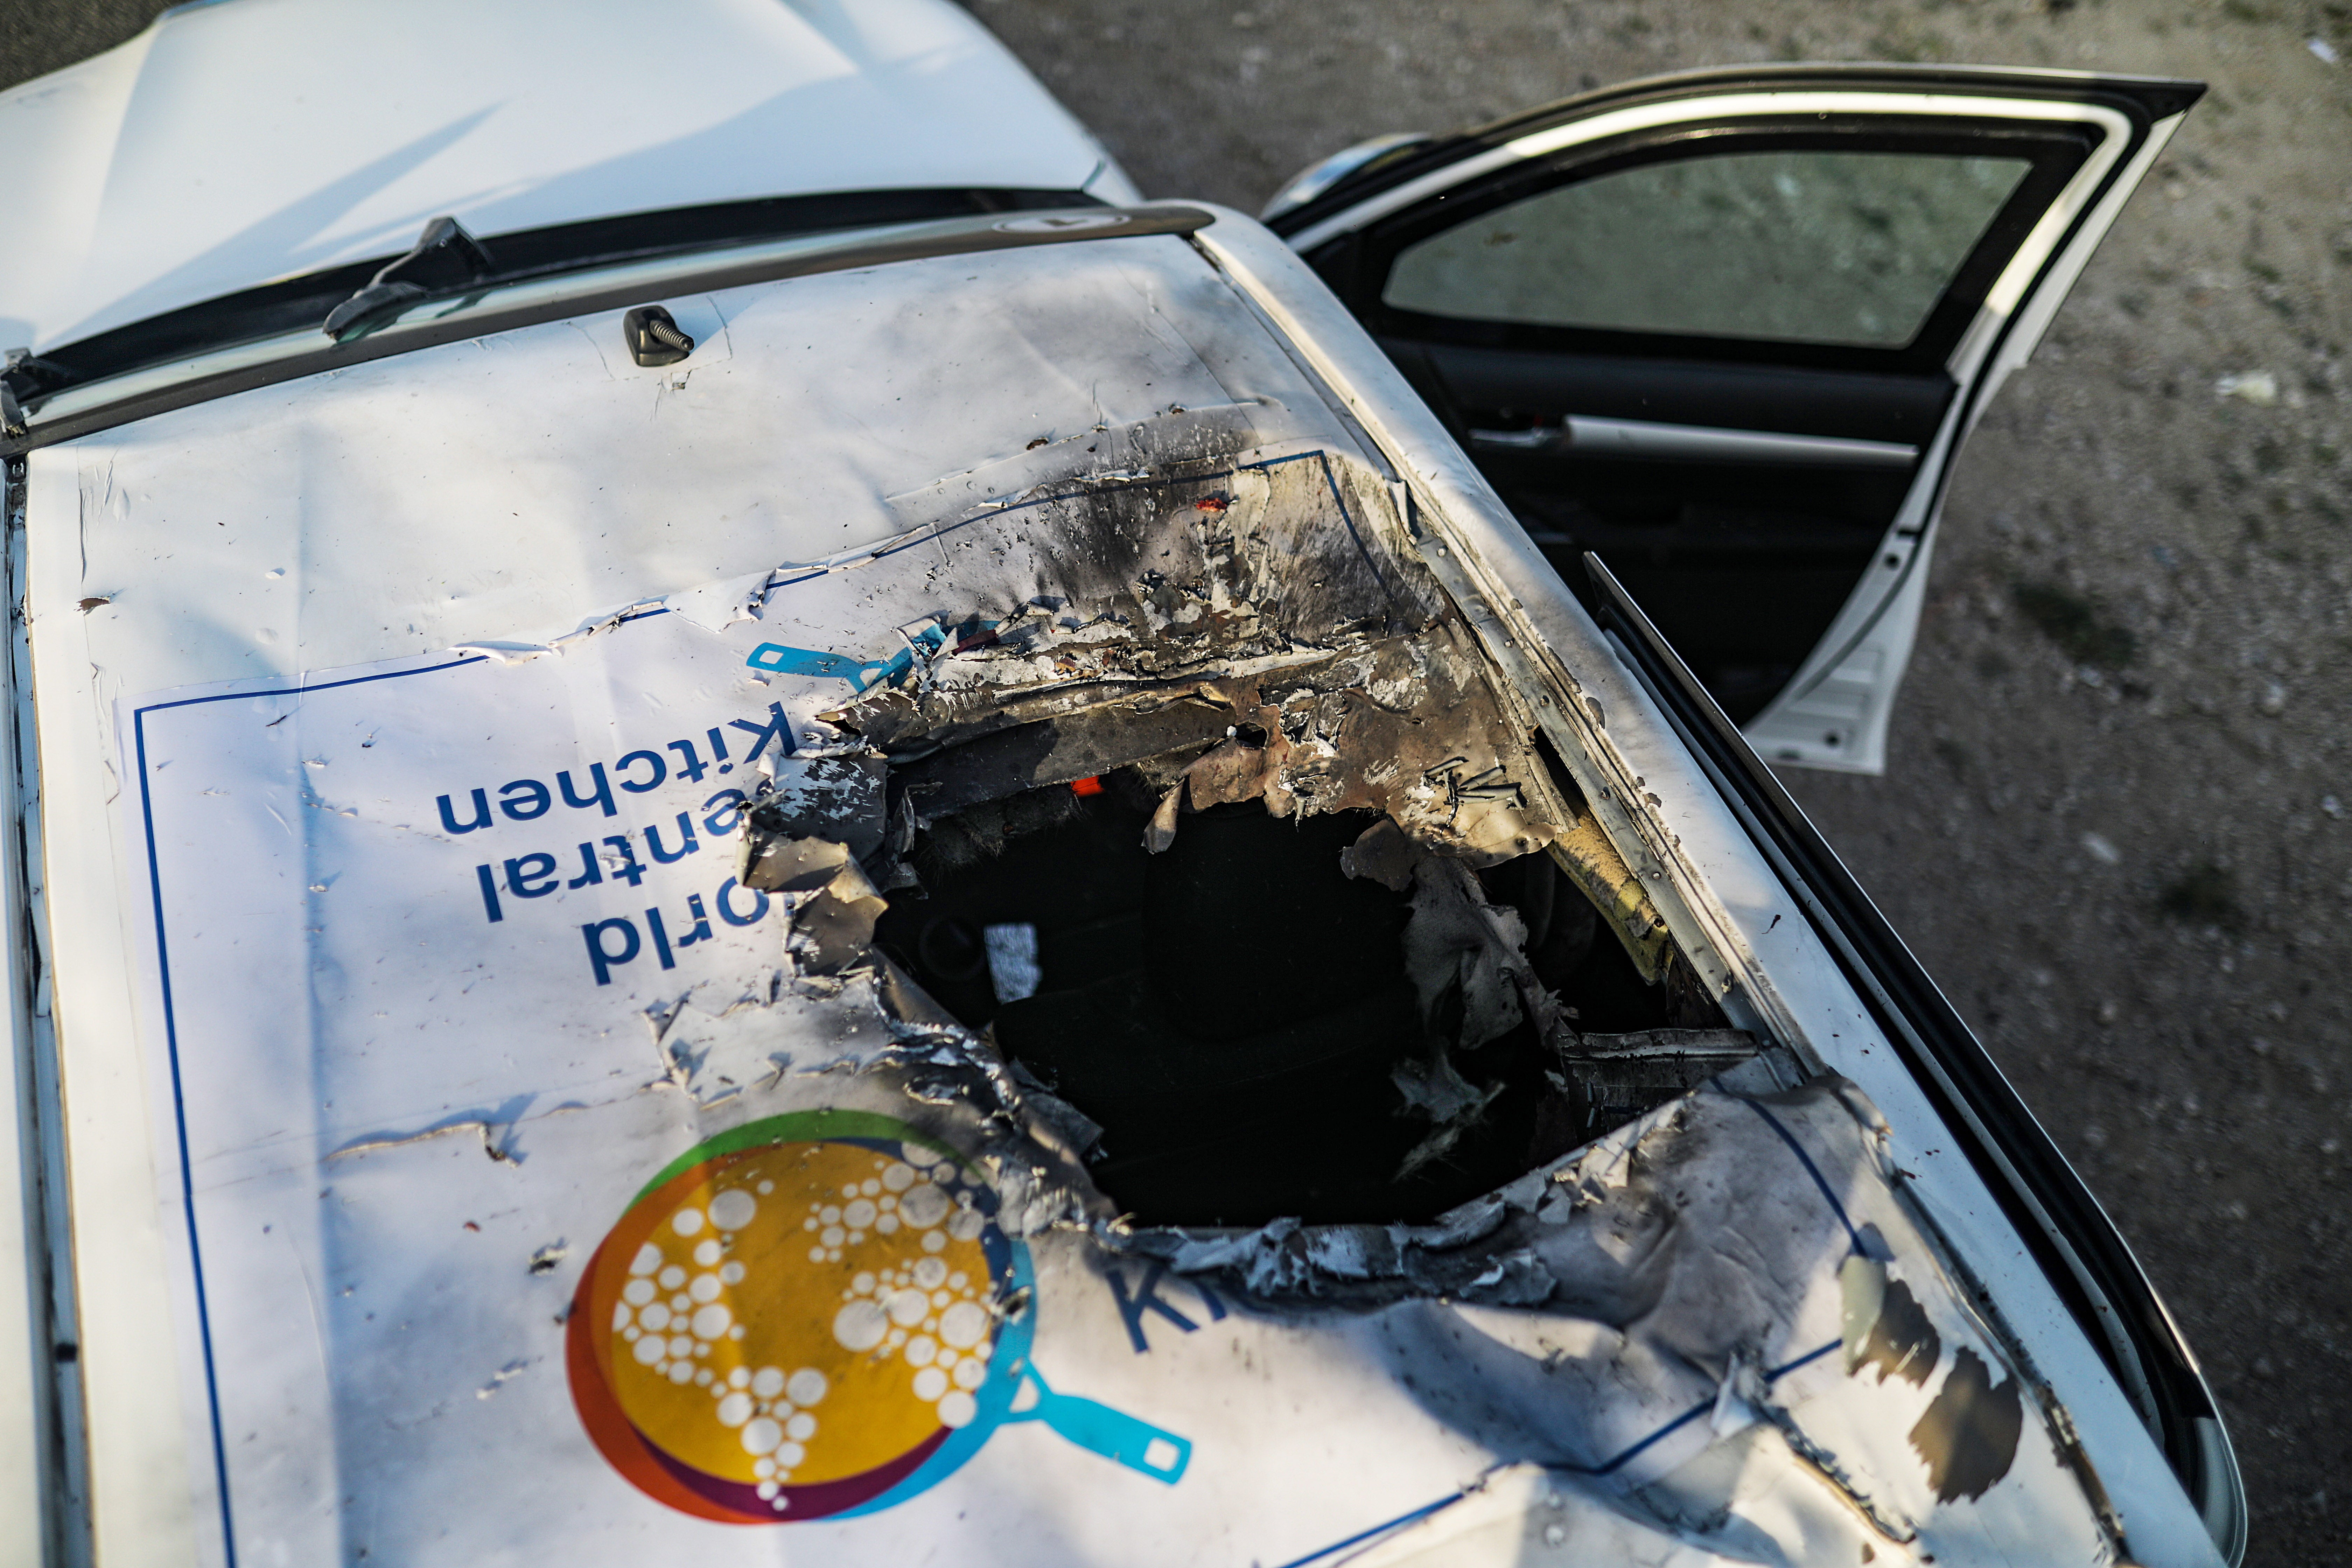 This car, bearing the World Central Kitchen logo, was targeted by an Israeli airstrike, the aid organisation said.